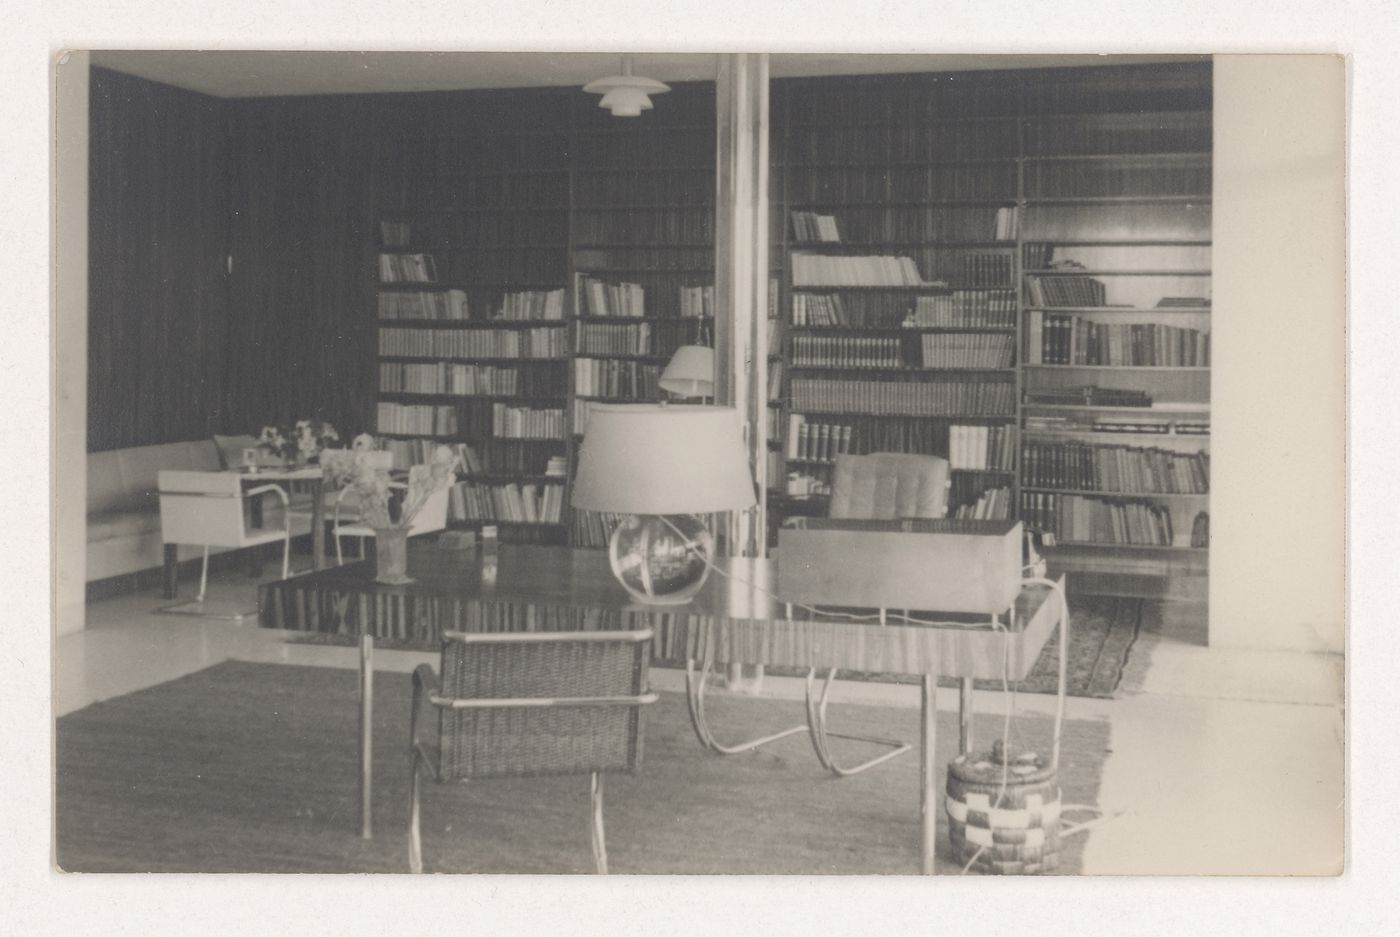 Interior view of the library of Tugendhat House, Brno, Czechoslovakia (now Czech Republic)